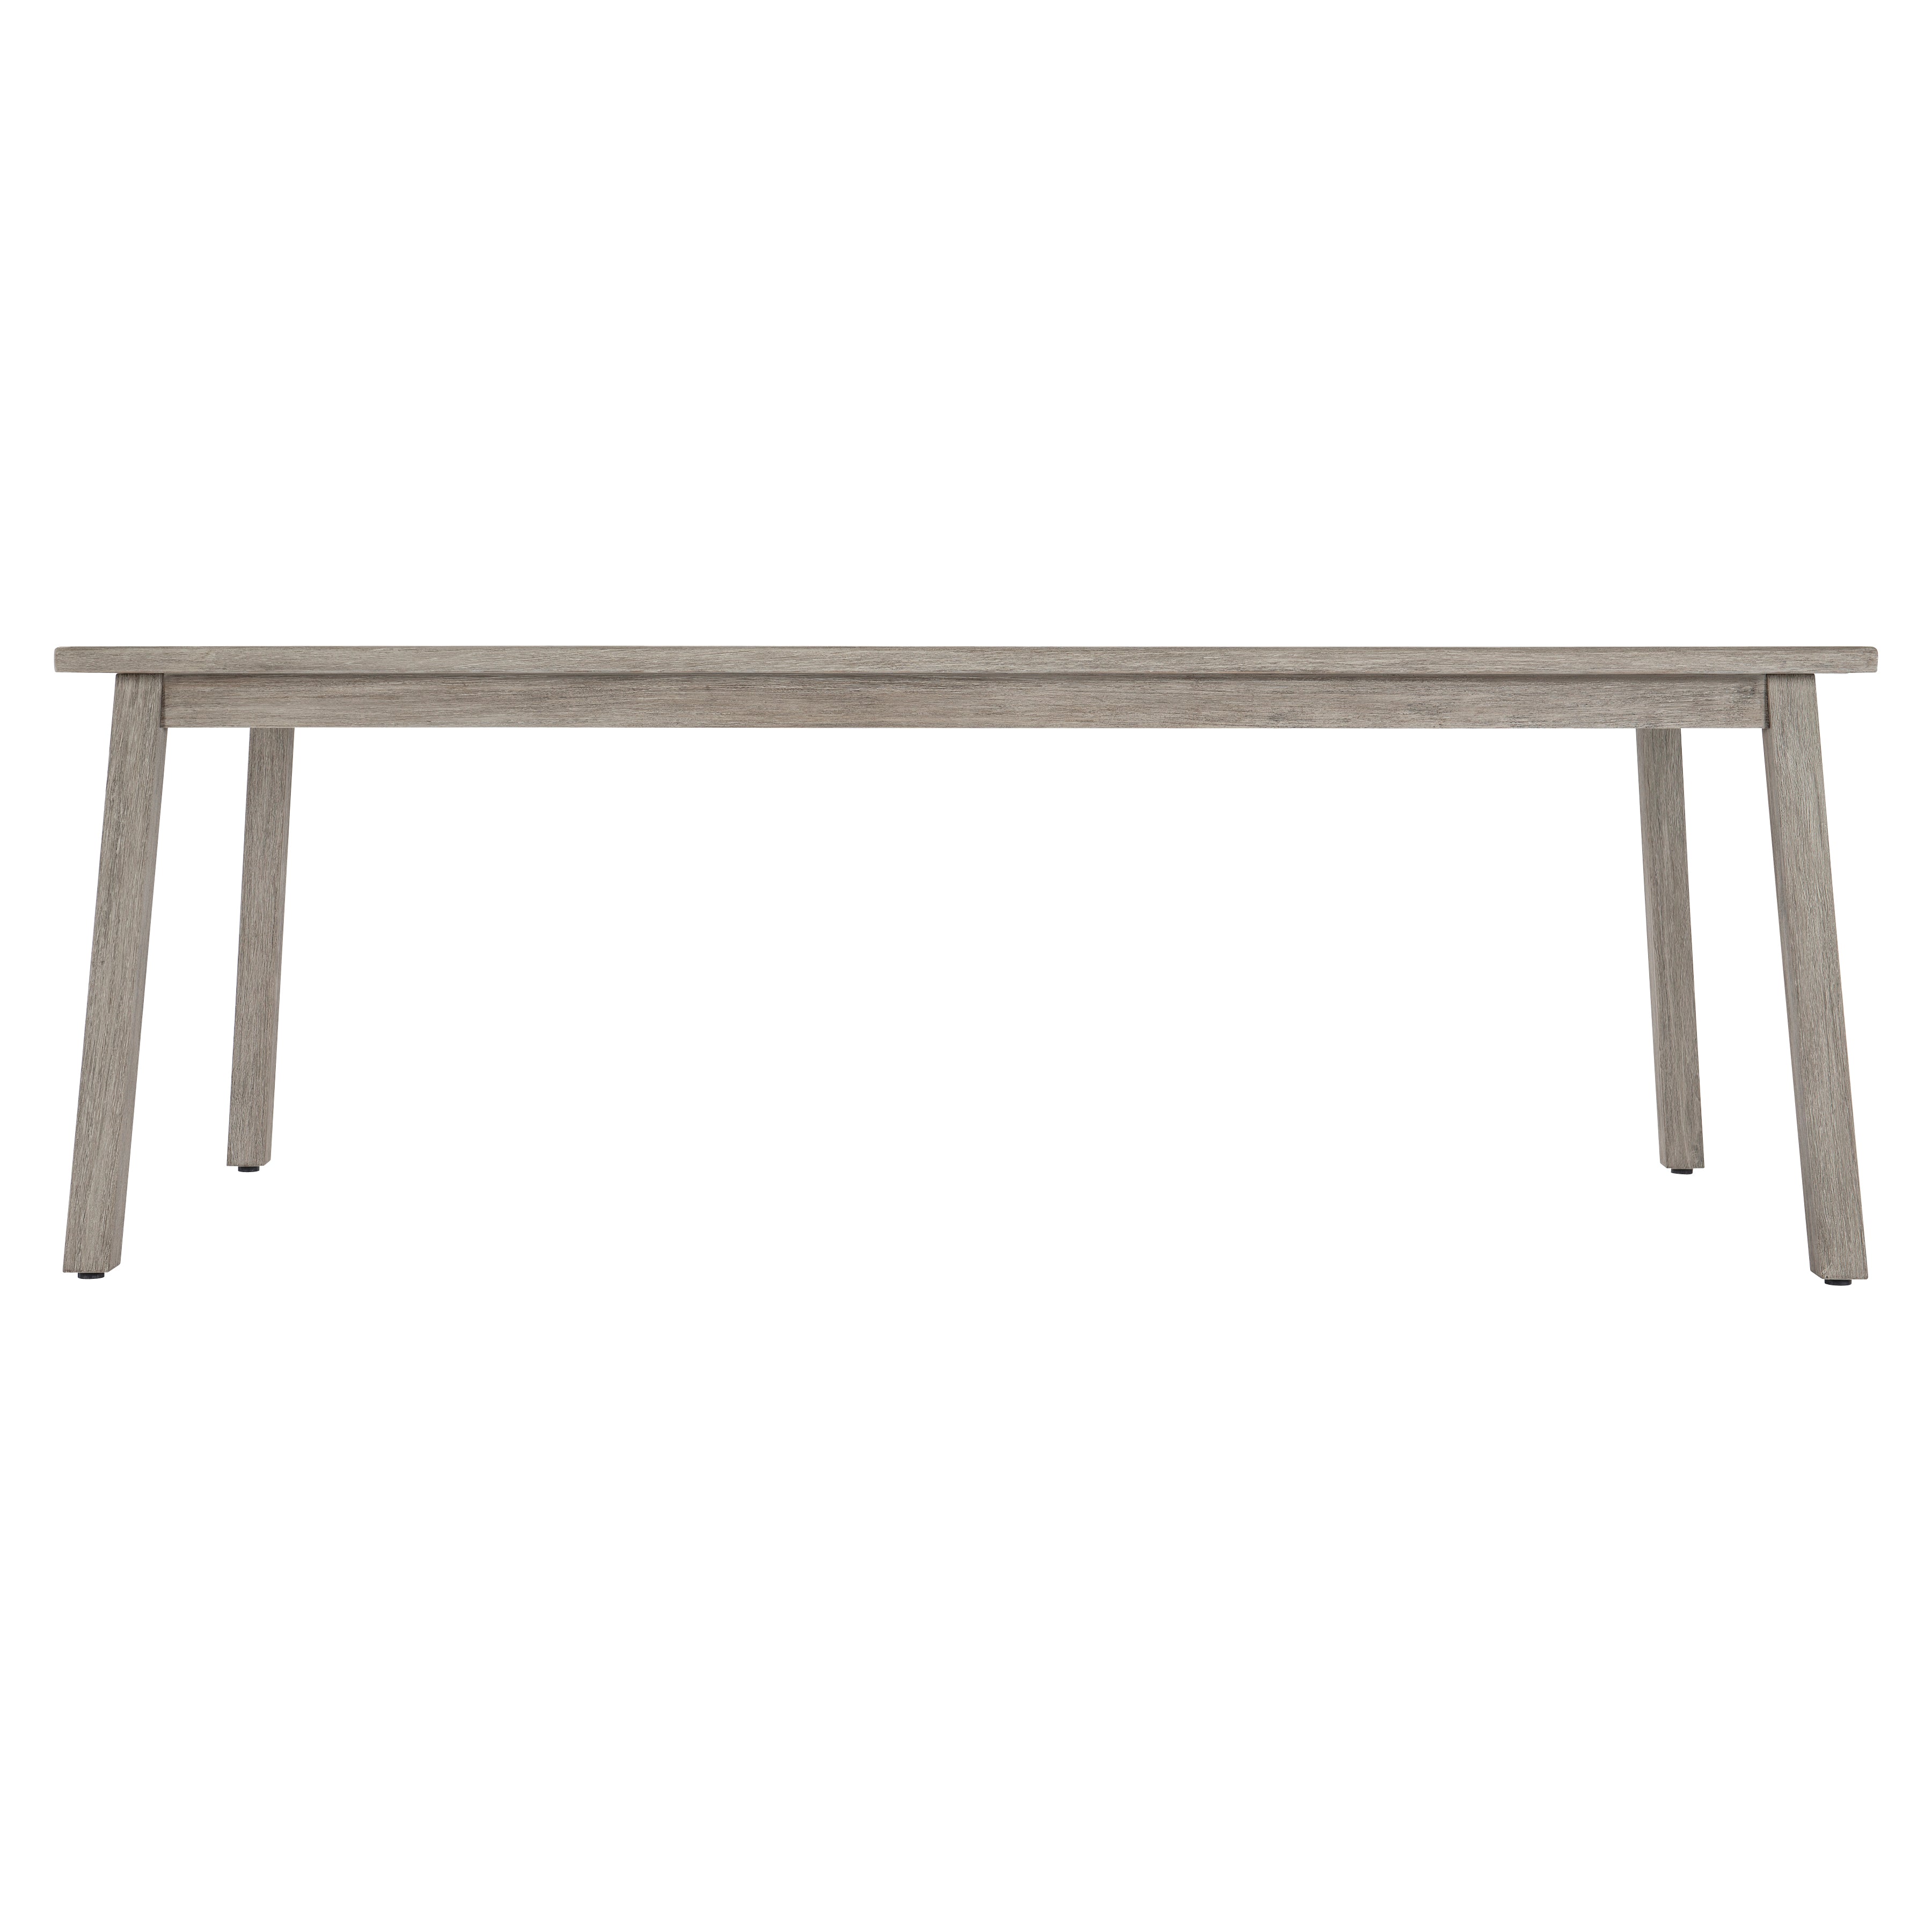 Antibes Outdoor Dining Table